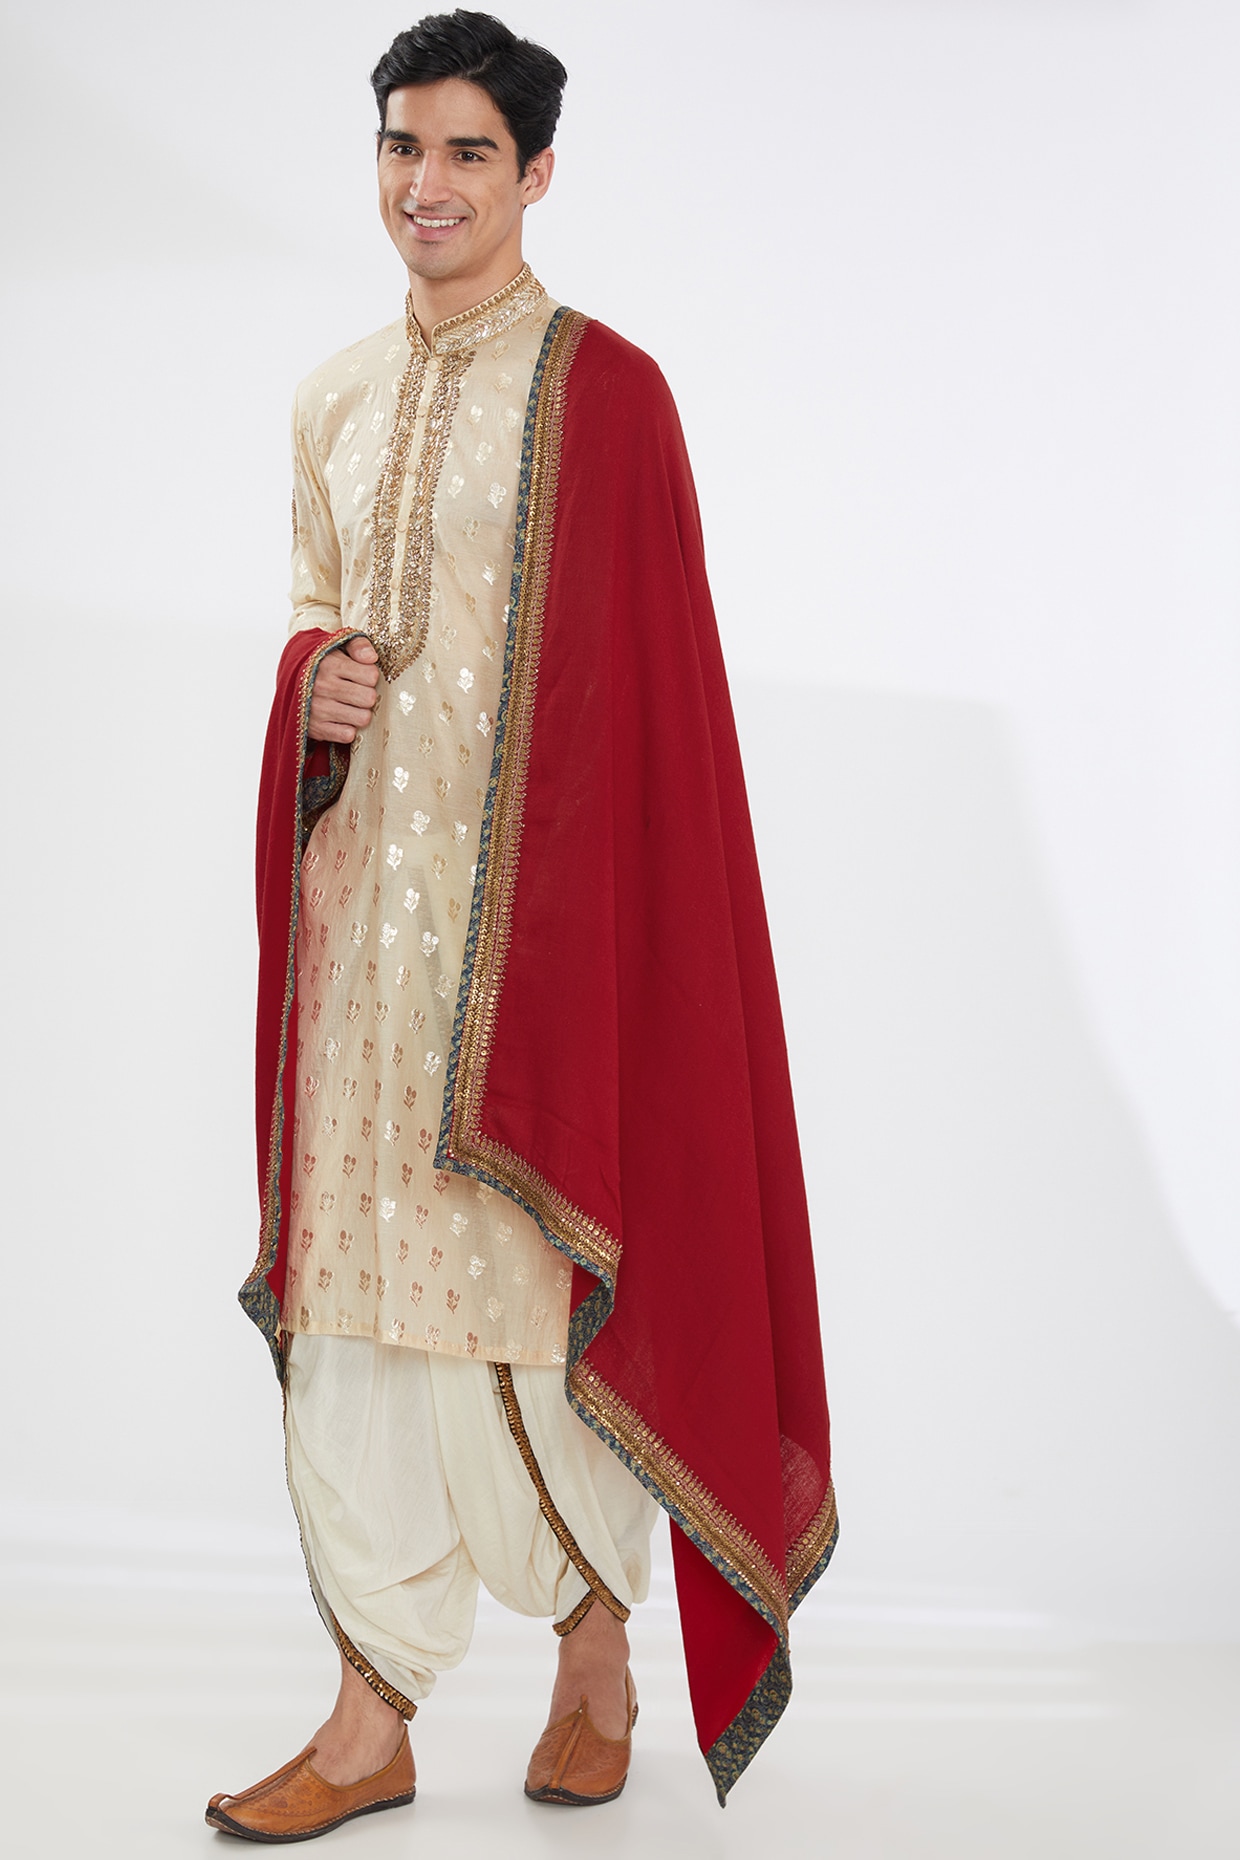 Joy Mitra Men - Red Woolen Embroidered Shawl for Men at Pernia's Pop Up Shop